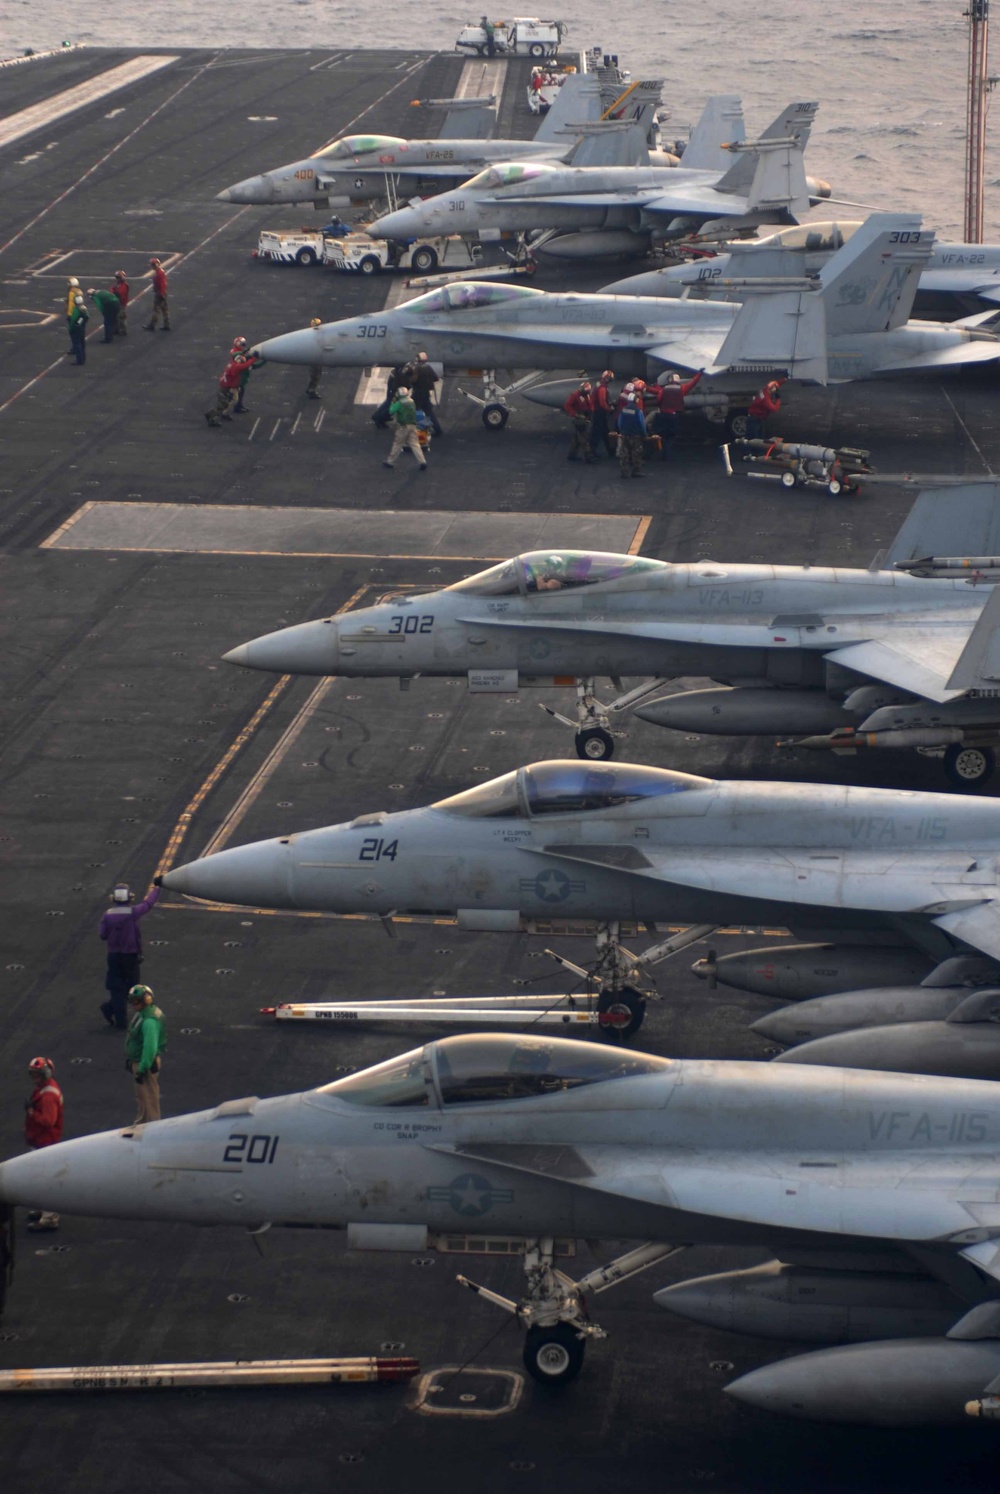 Getting the planes going aboard the USS Ronald Reagan